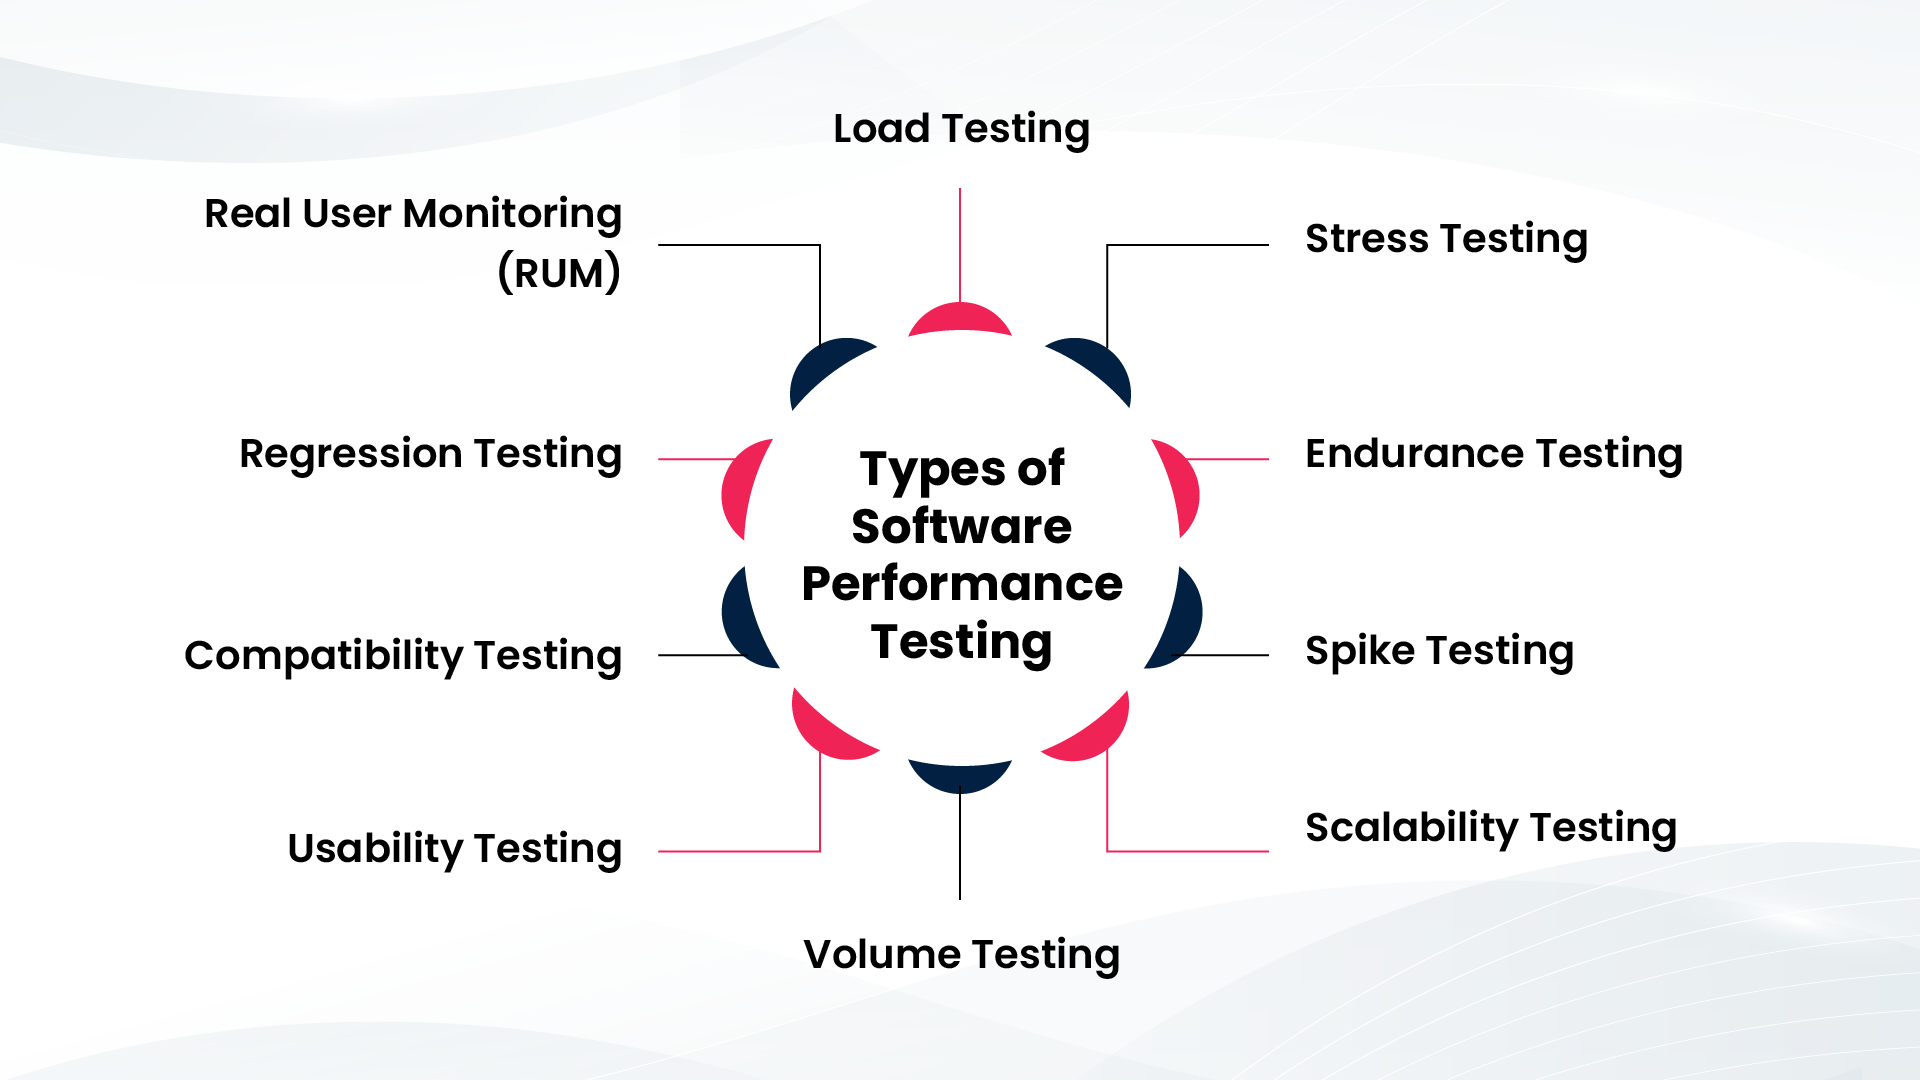 Types of software performance testing